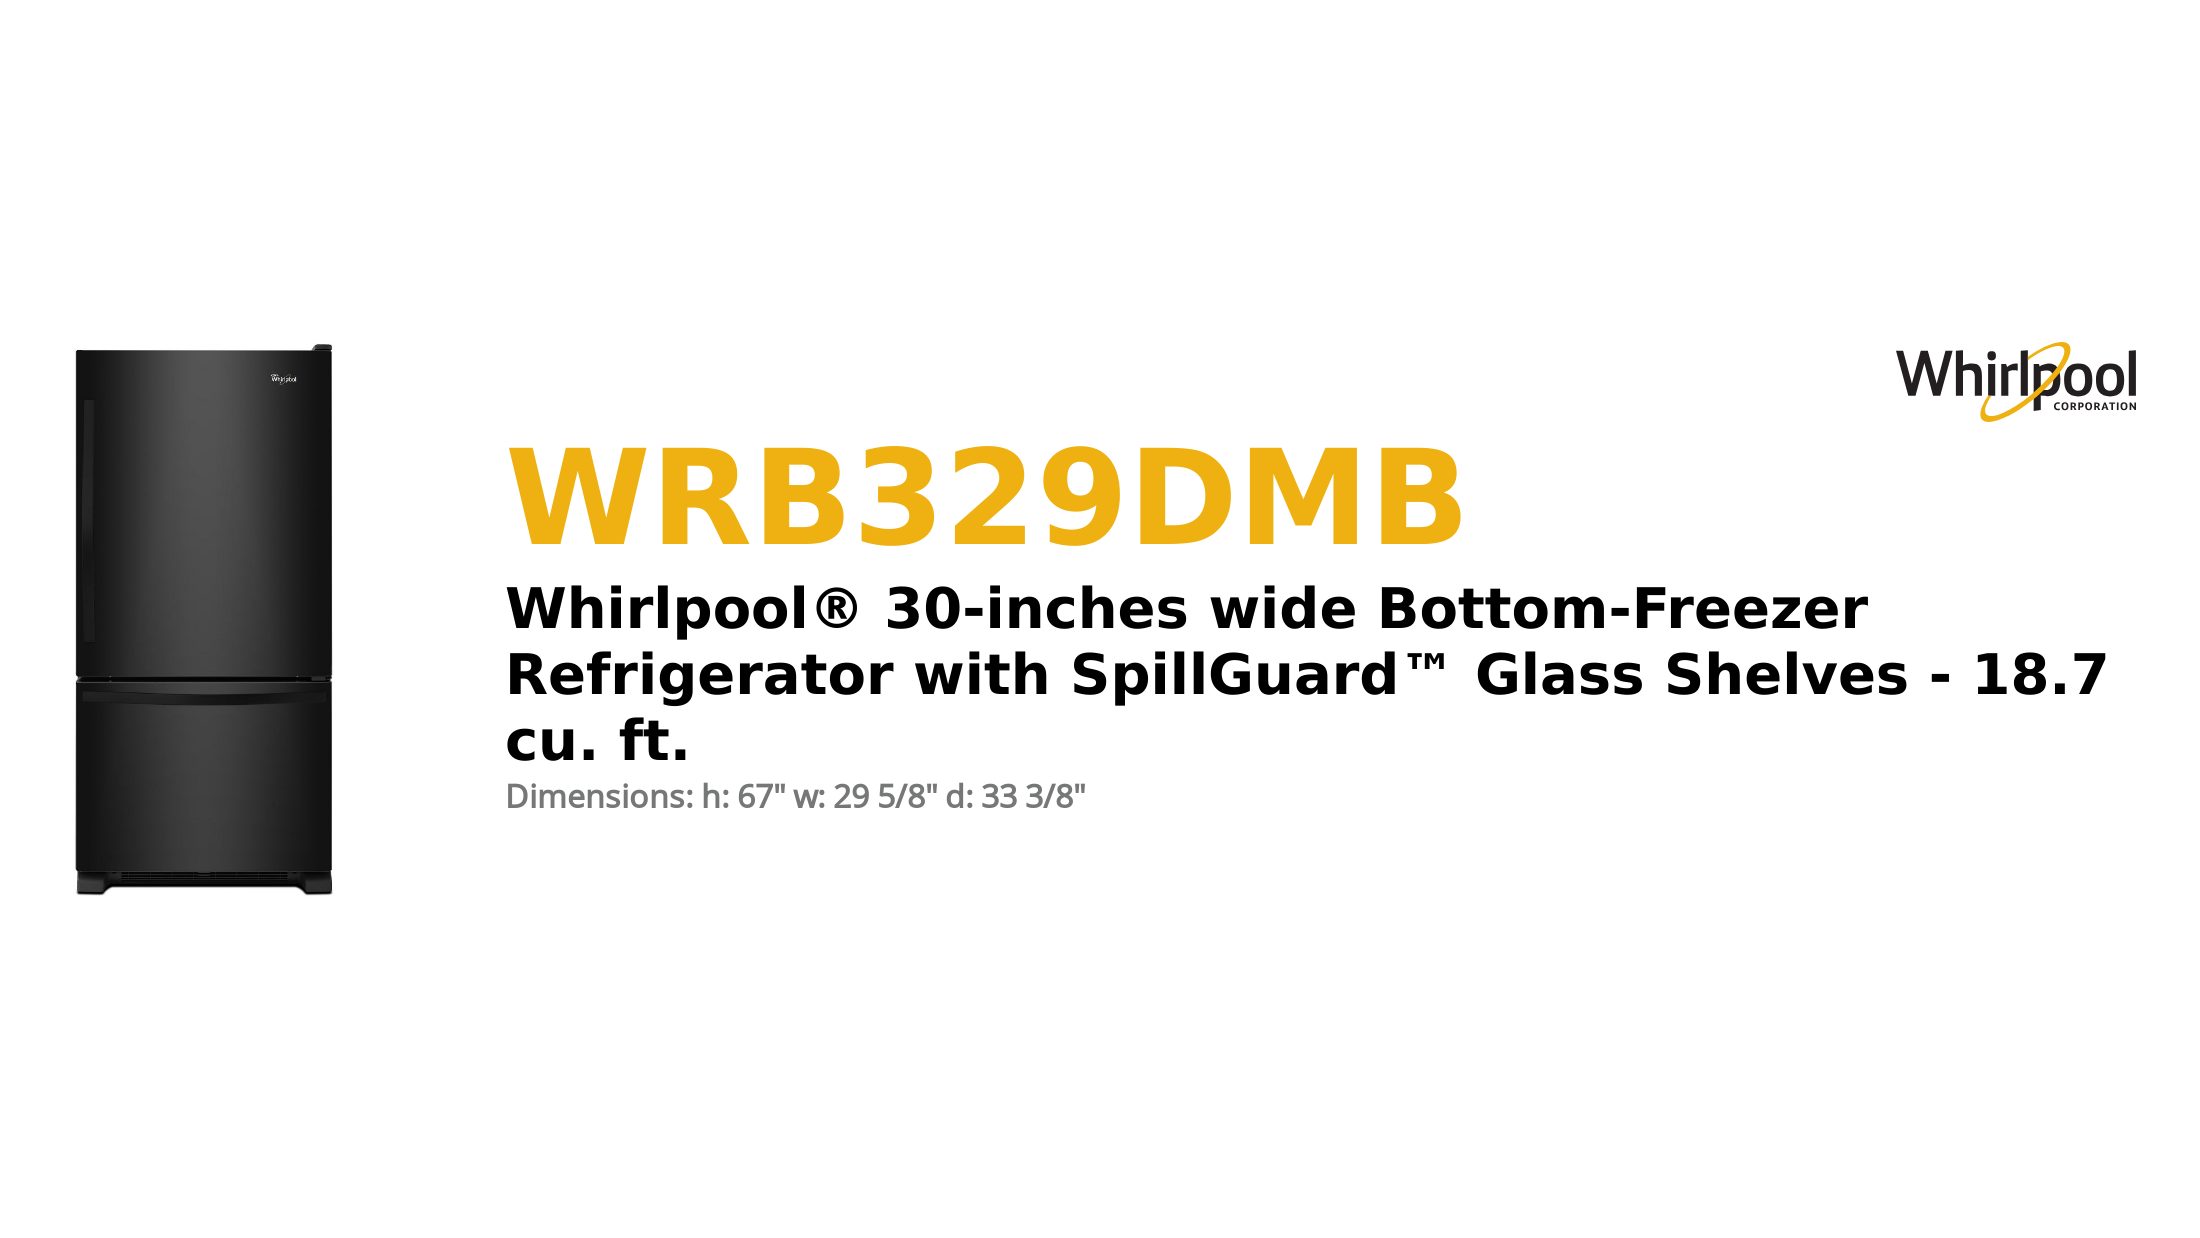 Whirlpool® 30-inches wide Bottom-Freezer Refrigerator with SpillGuard™ Glass Shelves - 18.7 cu. ft.